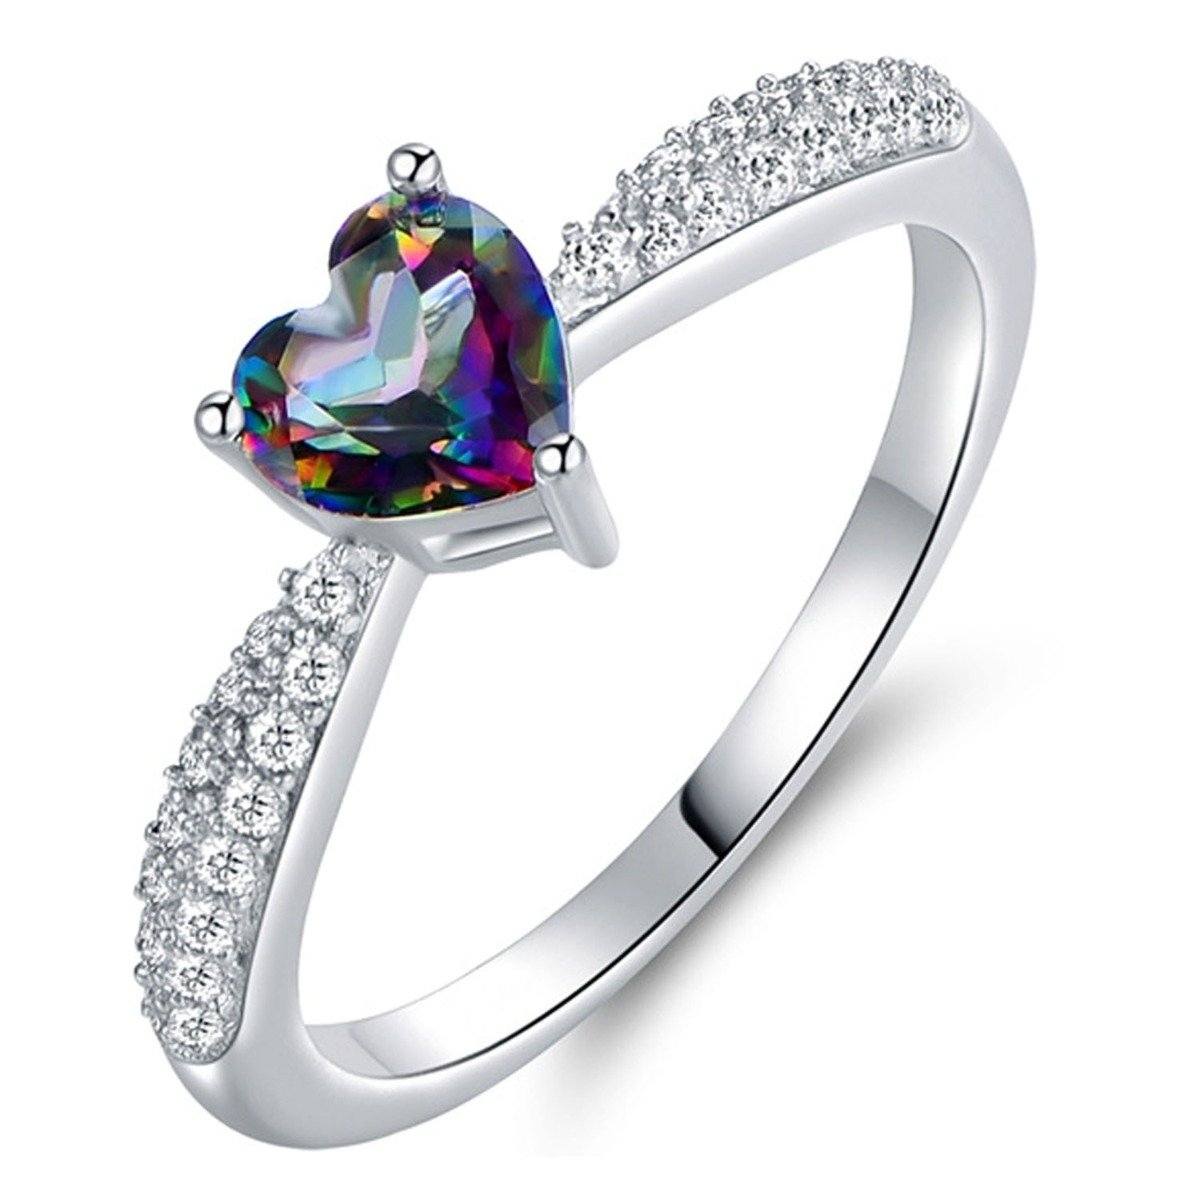 White Gold 3ct Heart-Cut Mystic Topaz Engagement Ring - Assorted Sizes / 6